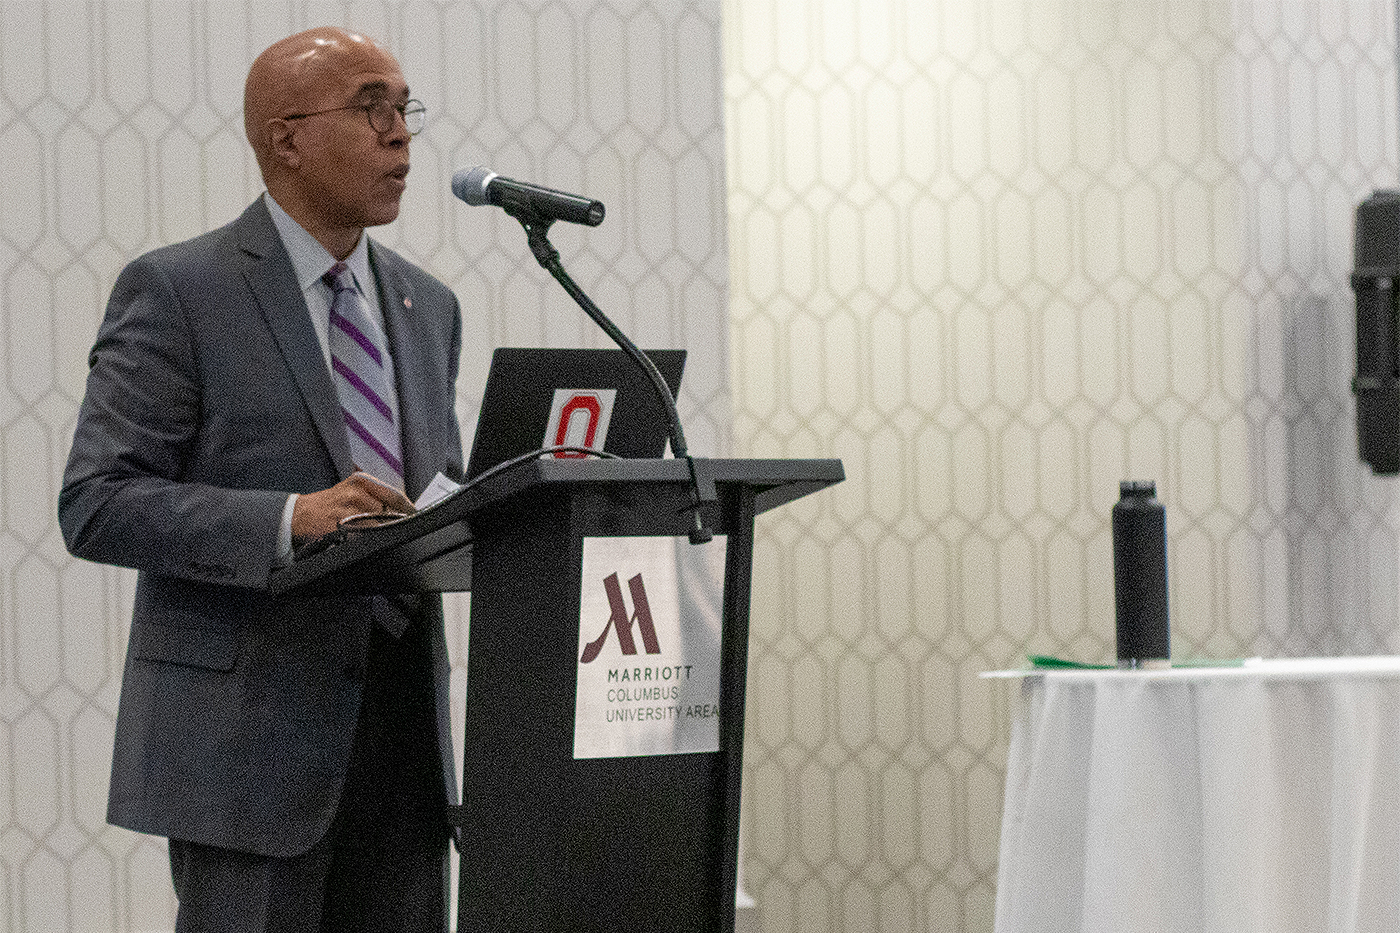 Donald Pope-Davis, Dean of the College of Education and Human Ecology at The Ohio State University, addresses those attending the 2023 Crane Symposium on Children. Pope-Davis, wearing a suit and tie, stands behind a podium and speaks into a microphone attached to the podium.